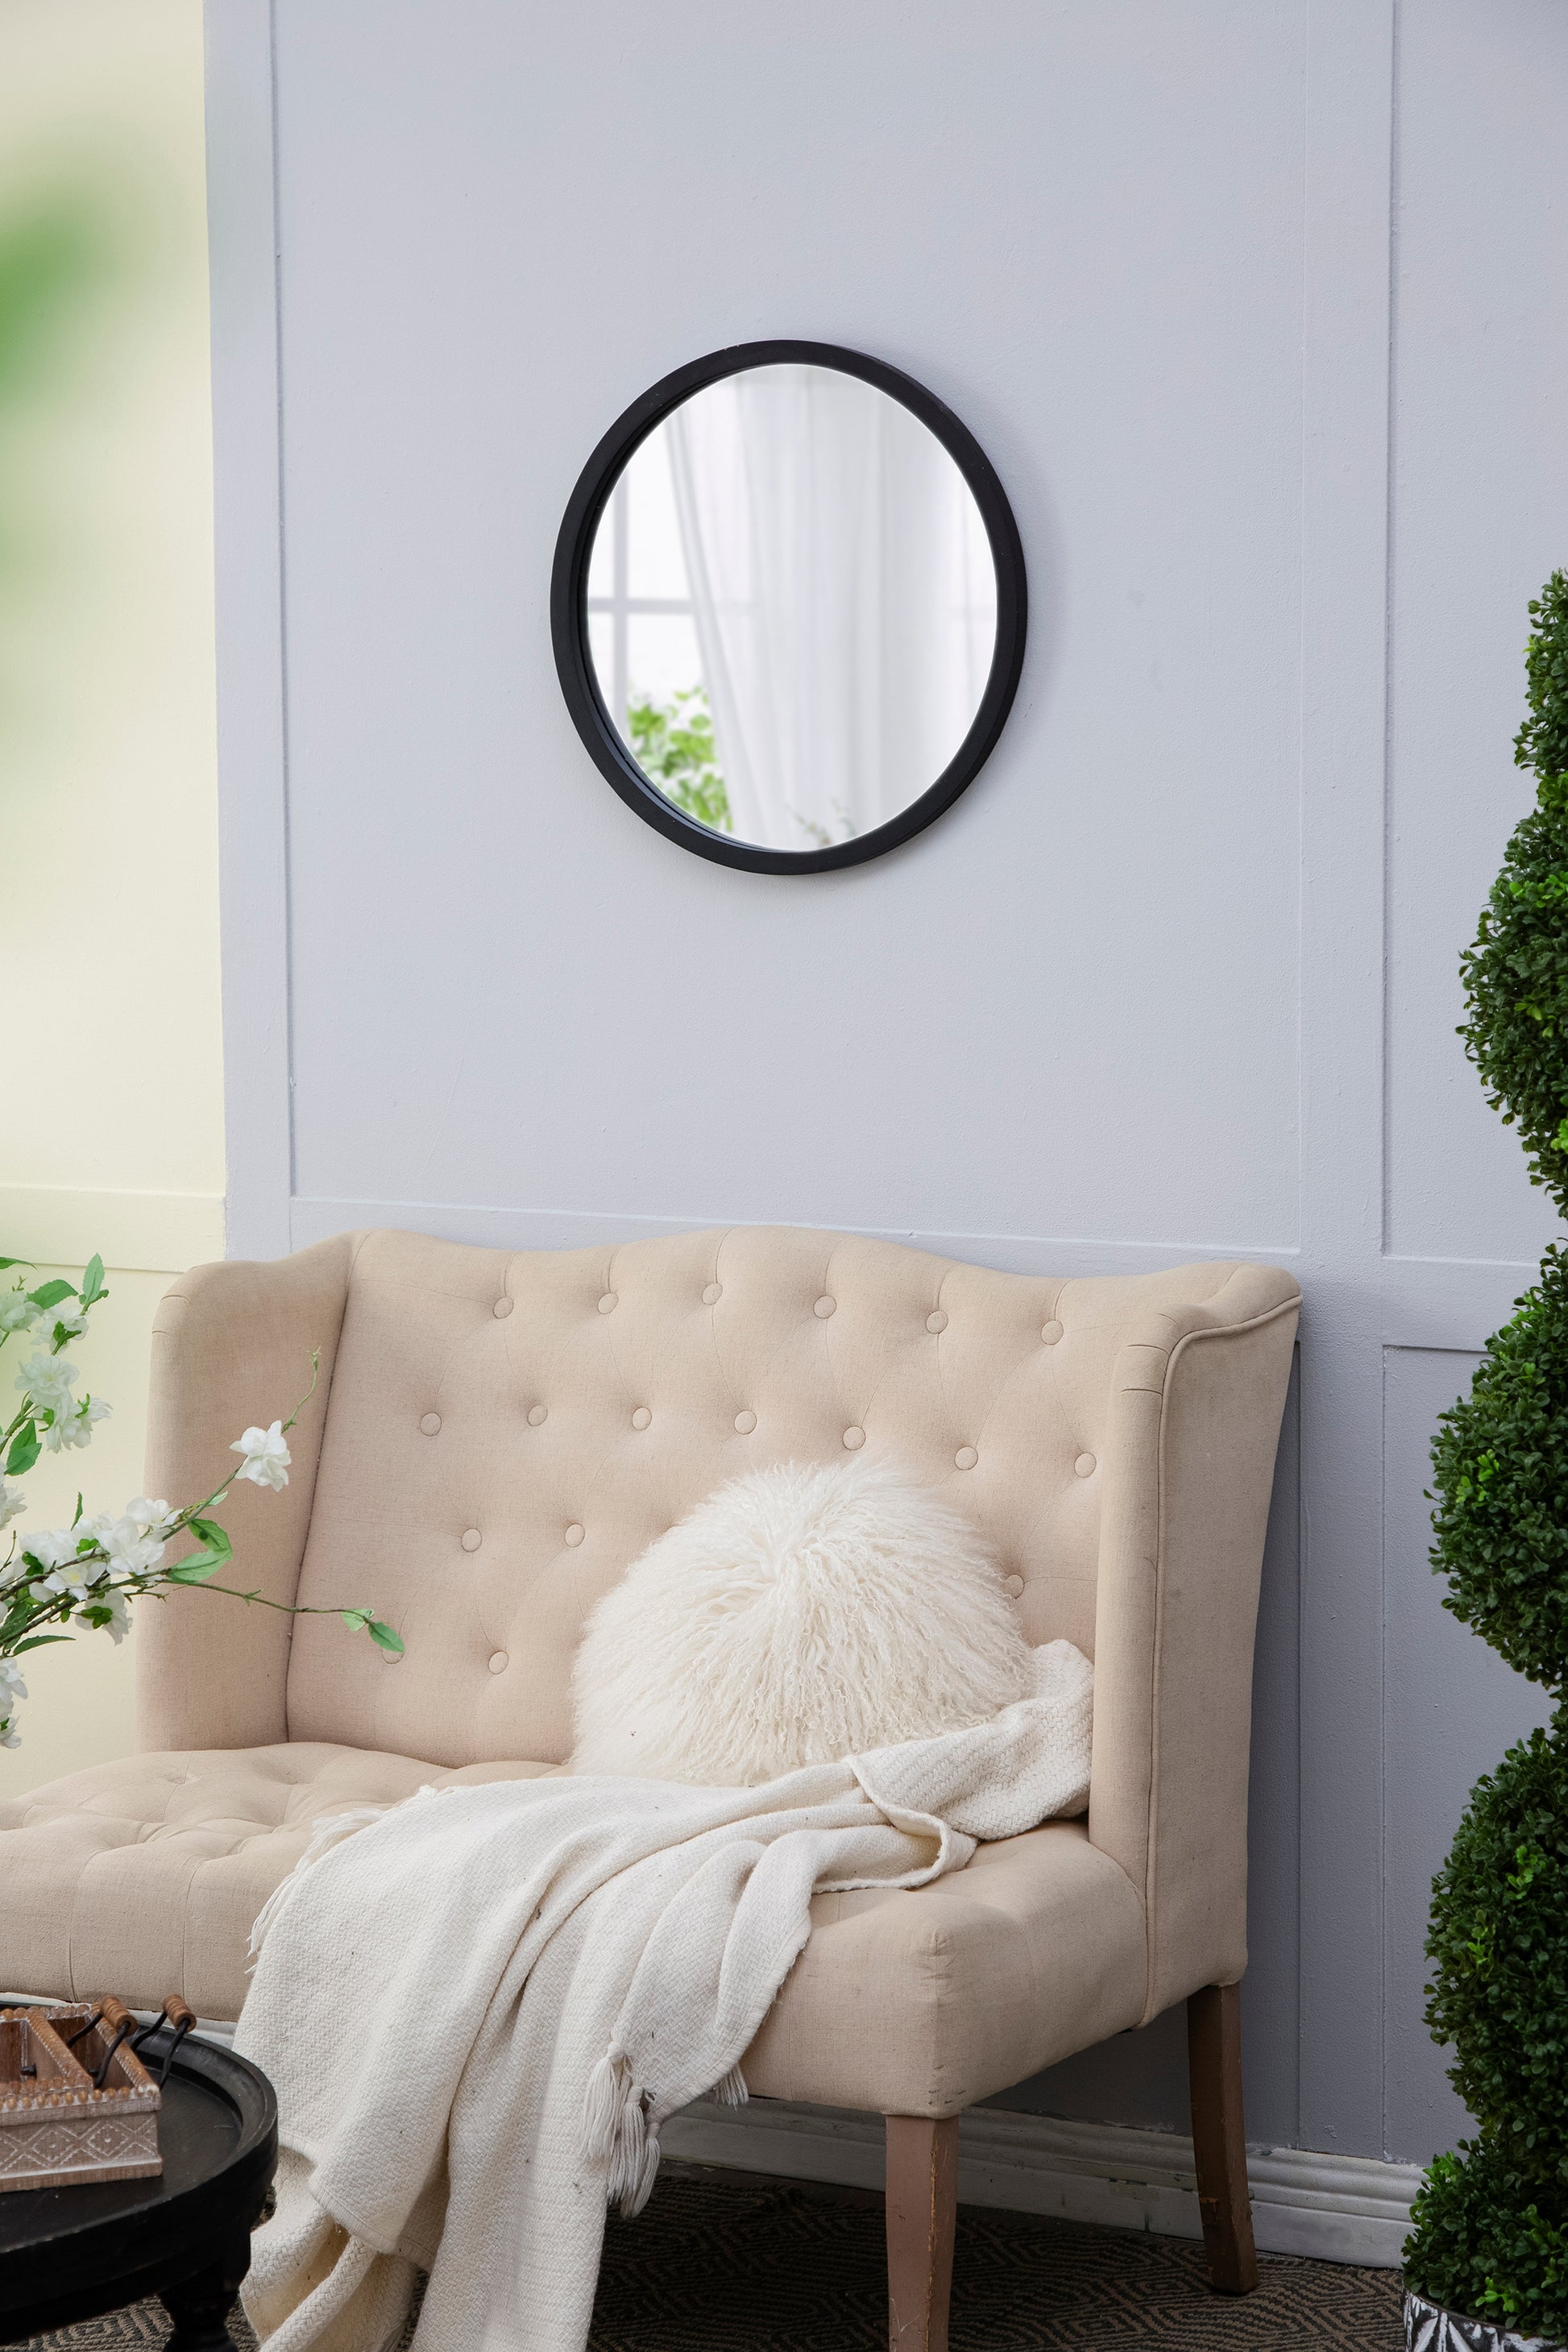 20" x 20" Circle Wall Mirror with Wooden Frame and black-wood+glass